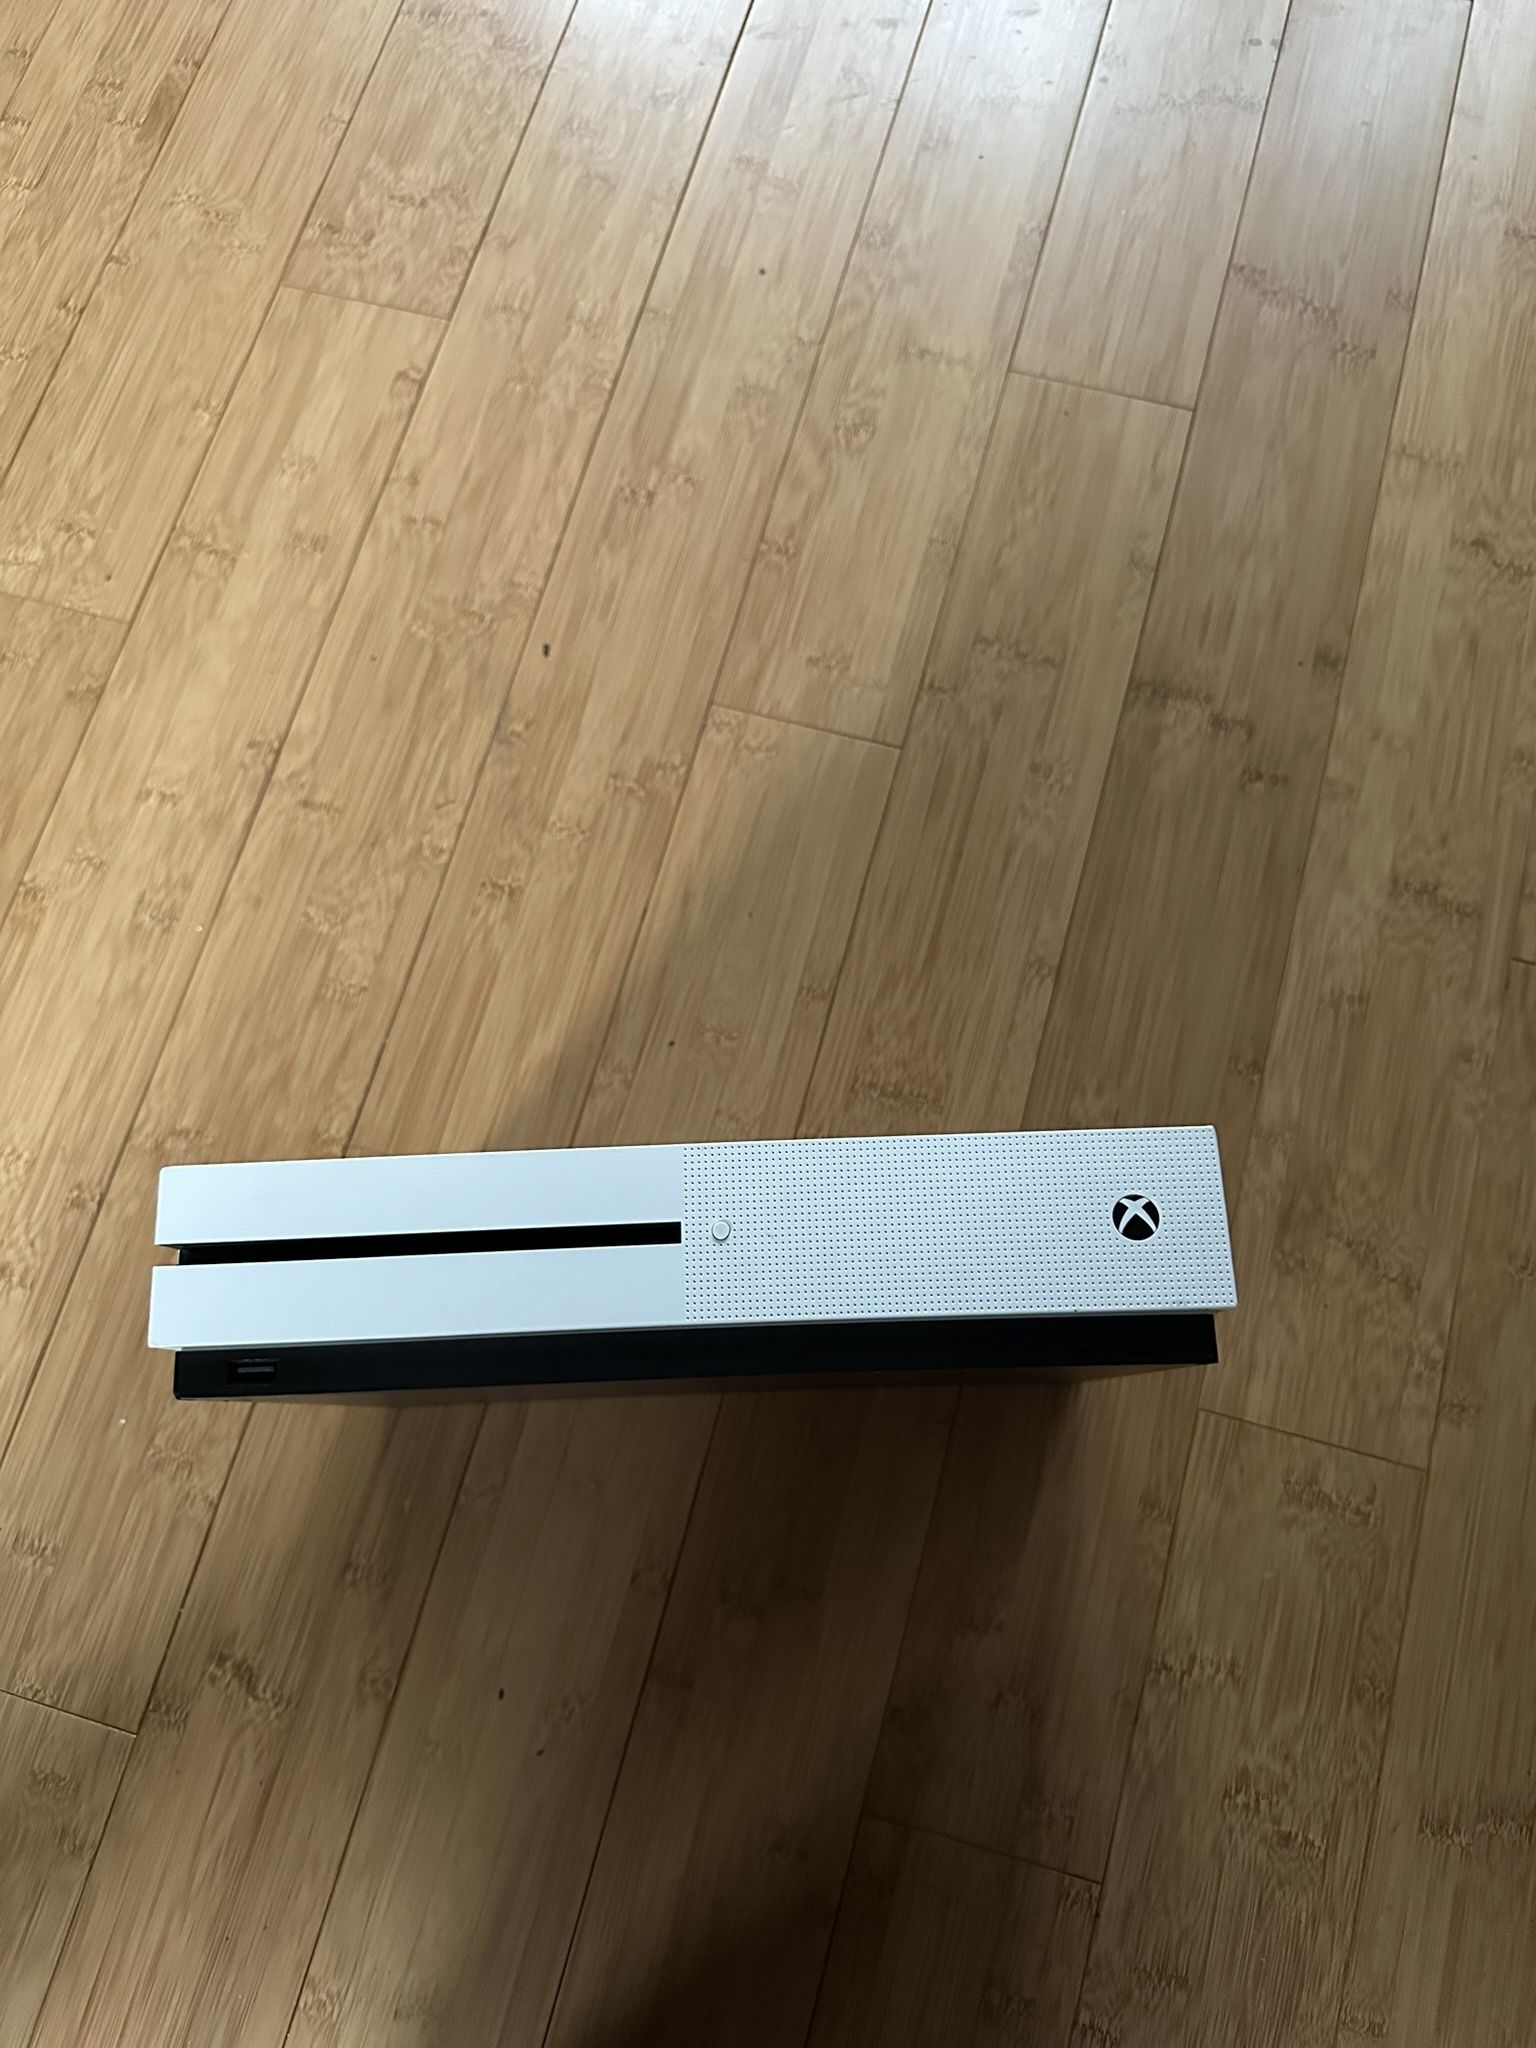 xbox one s with black controller